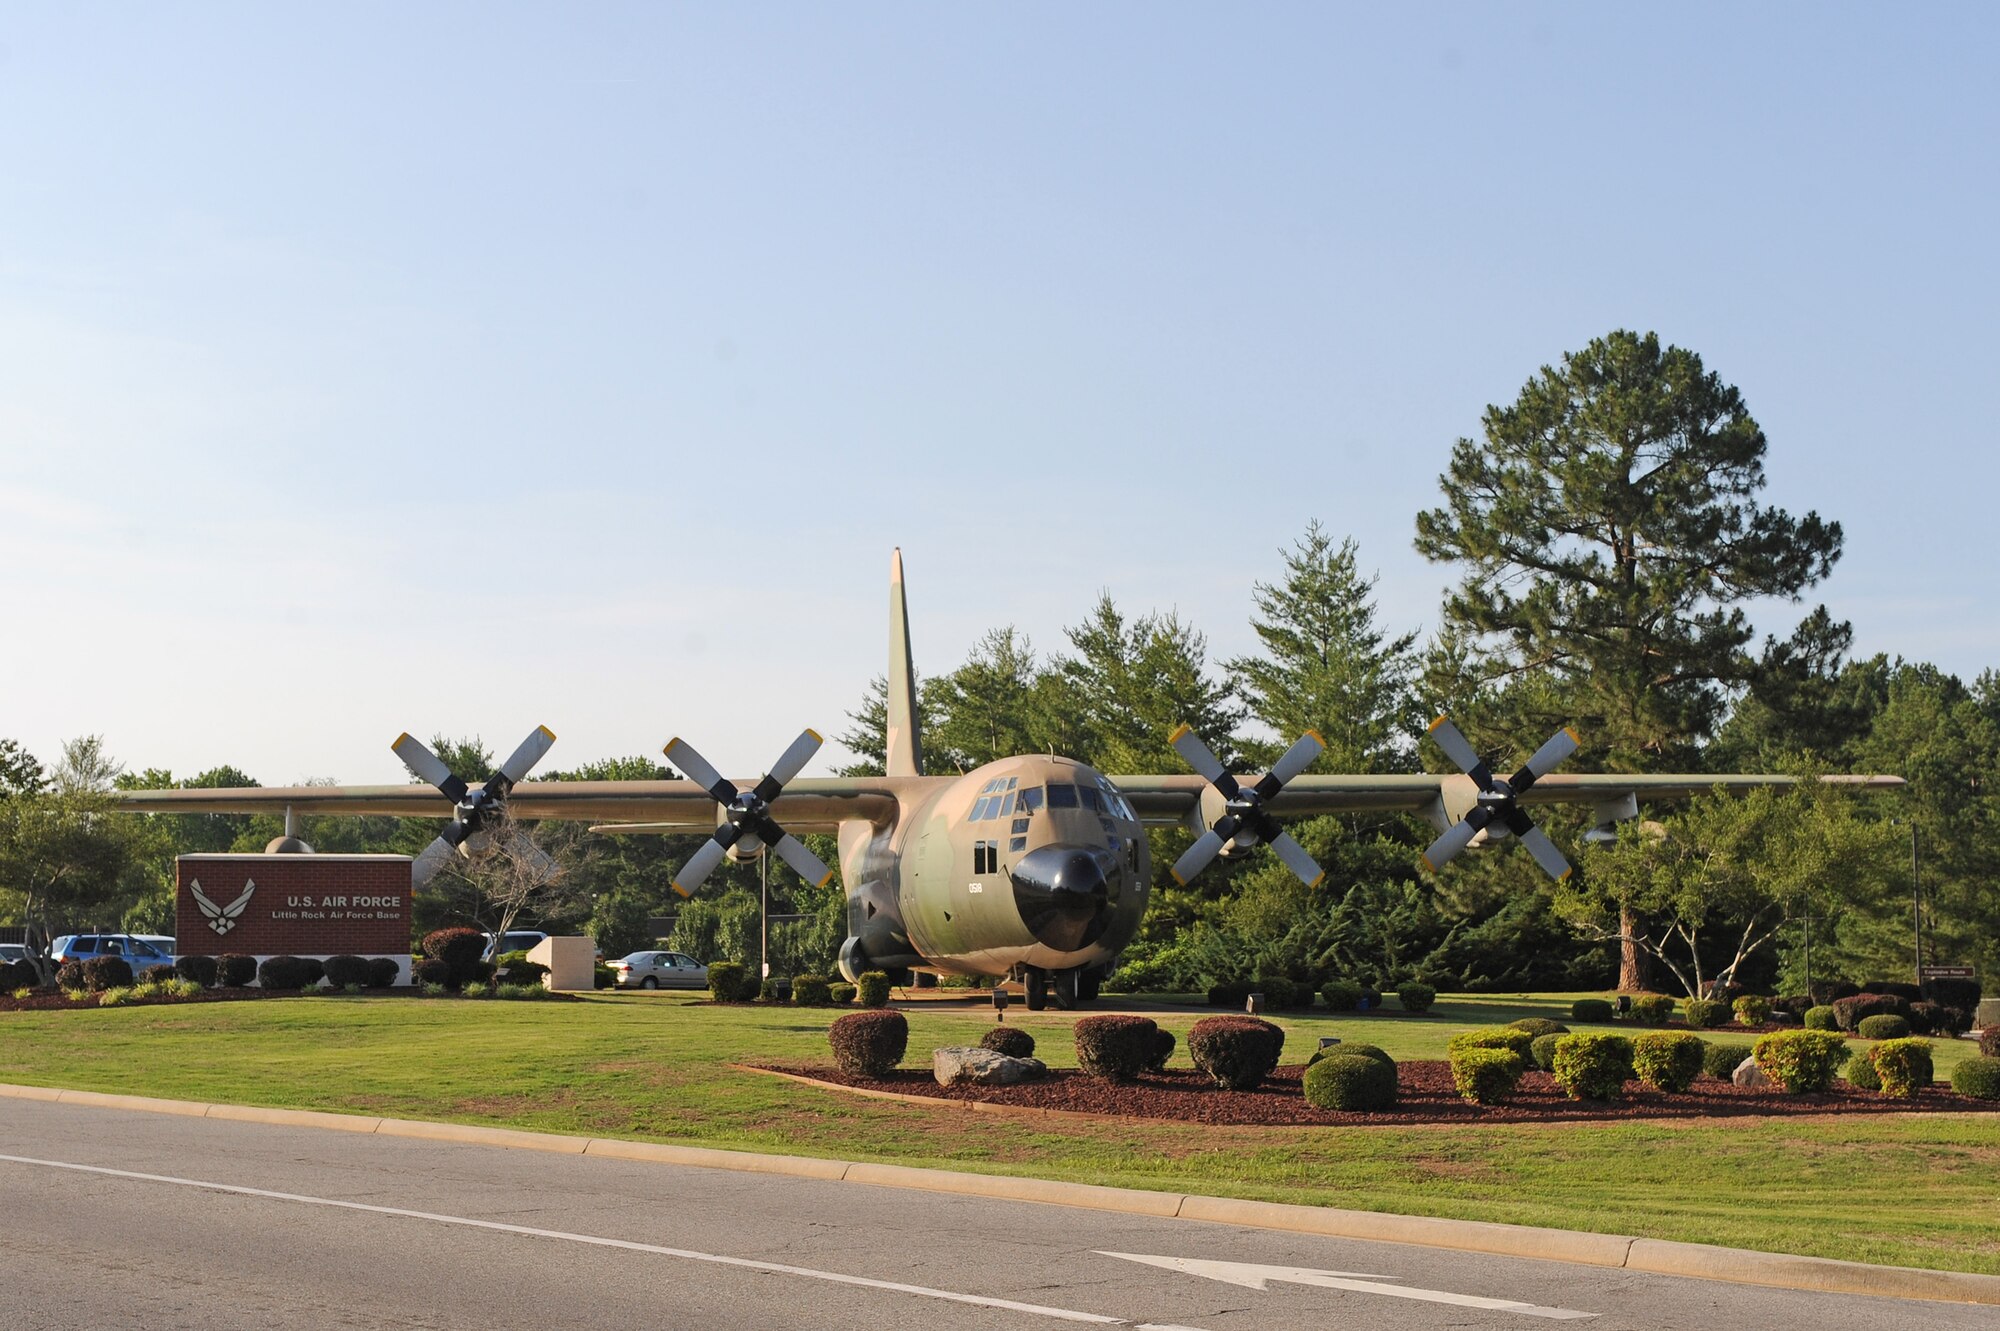 On April 29, 1975, Herk C-130A 56-0518, that sits on display at the base’s front gate, flew the last mission out of Vietnam during the fall of Saigon. With more than 100 aircraft destroyed on the flightline at Tan Son Nhut Air Base, it was the last flyable C-130. In a panicked state, hundreds of people rushed to get aboard, as the aircraft represented a final ticket to freedom. The number of individuals aboard the plane and standing on the rear ramp required the pilot to taxi forward before hitting the brakes; this allowed the loadmaster to successfully close the doors. In all, 452 people were on board, including the 32 in the cockpit. It was estimated the aircraft was overloaded by at least 10,000 pounds. Consequently, the Herk used every bit of the runway and overrun before it was able to get airborne. After getting lost, the pilot landed the C-130 at Utapao, Thailand. The aircraft has been on display at Little Rock Air Force Base’s front gate since June 1989.